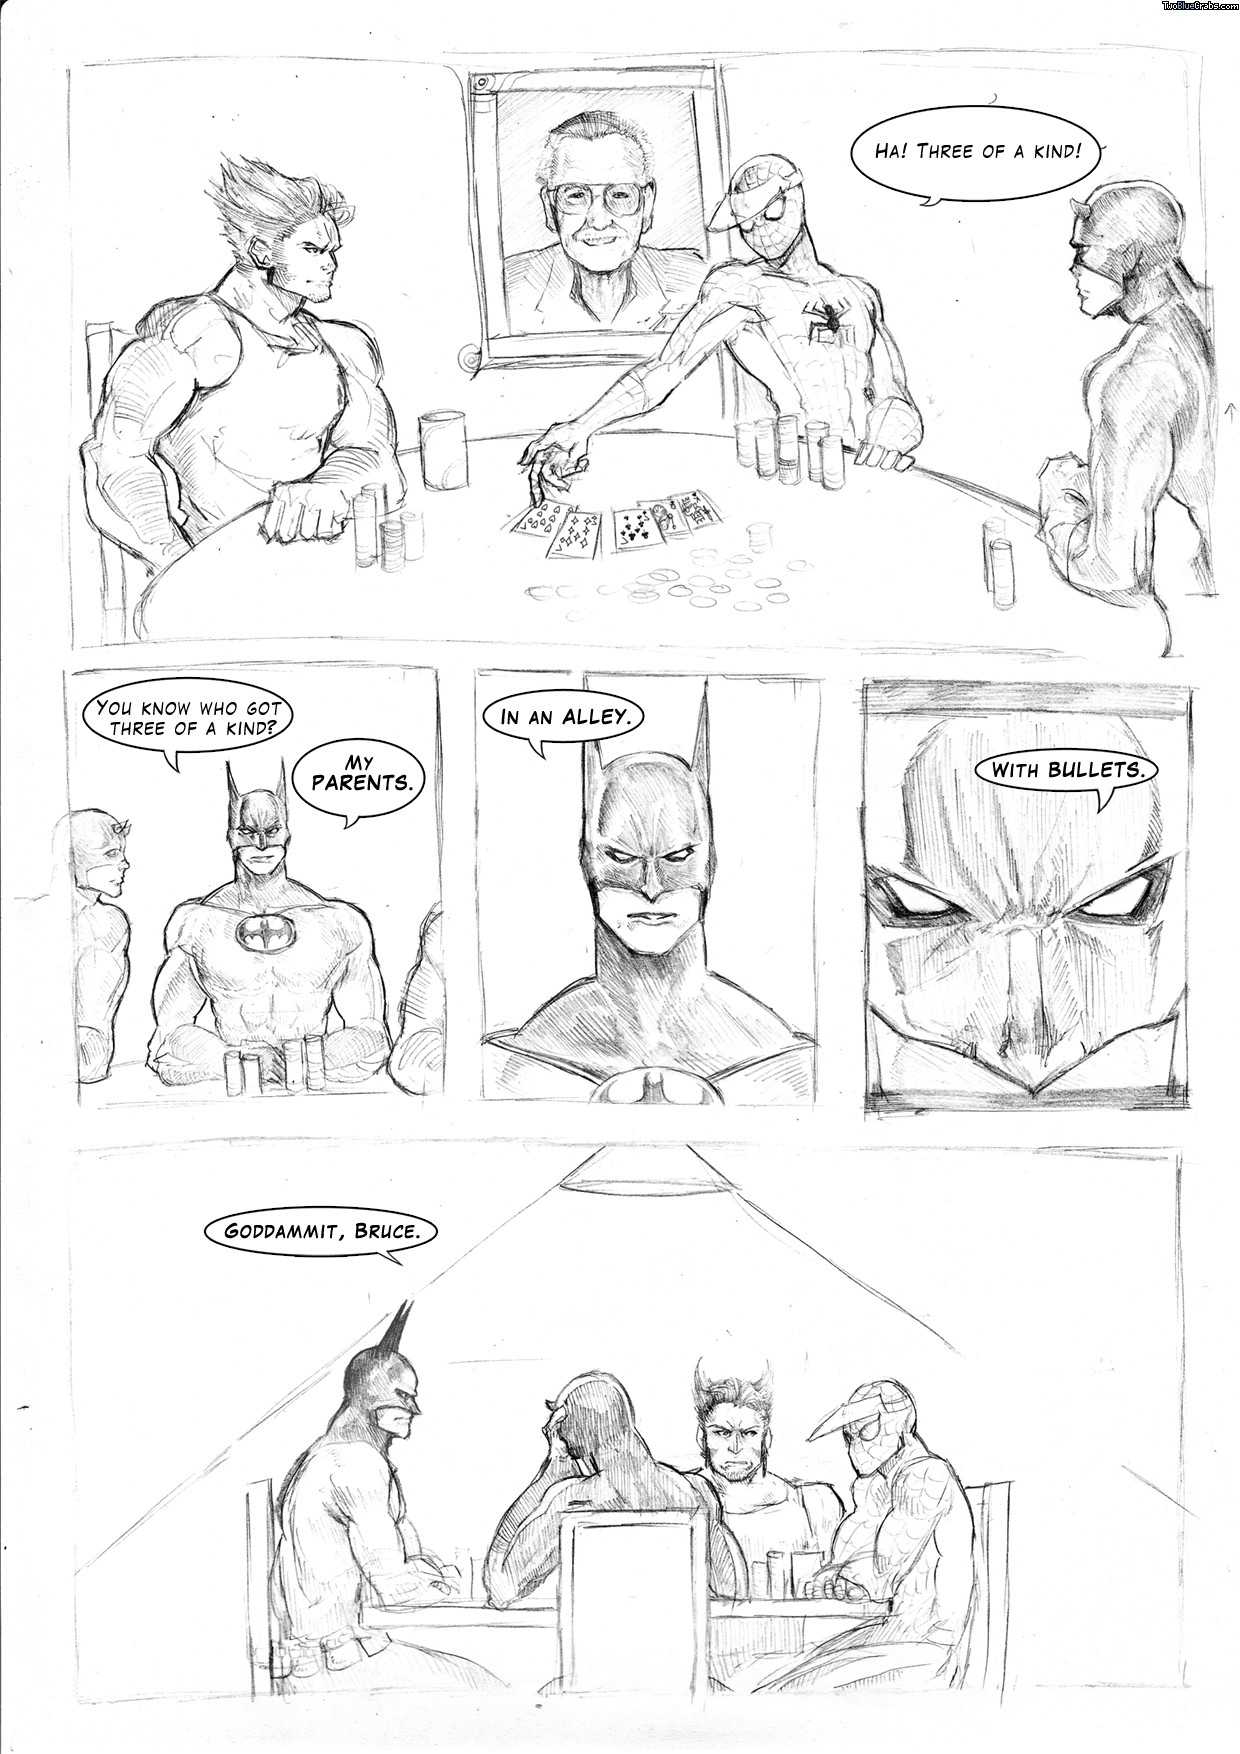 batman-is-kind-of-a-downer